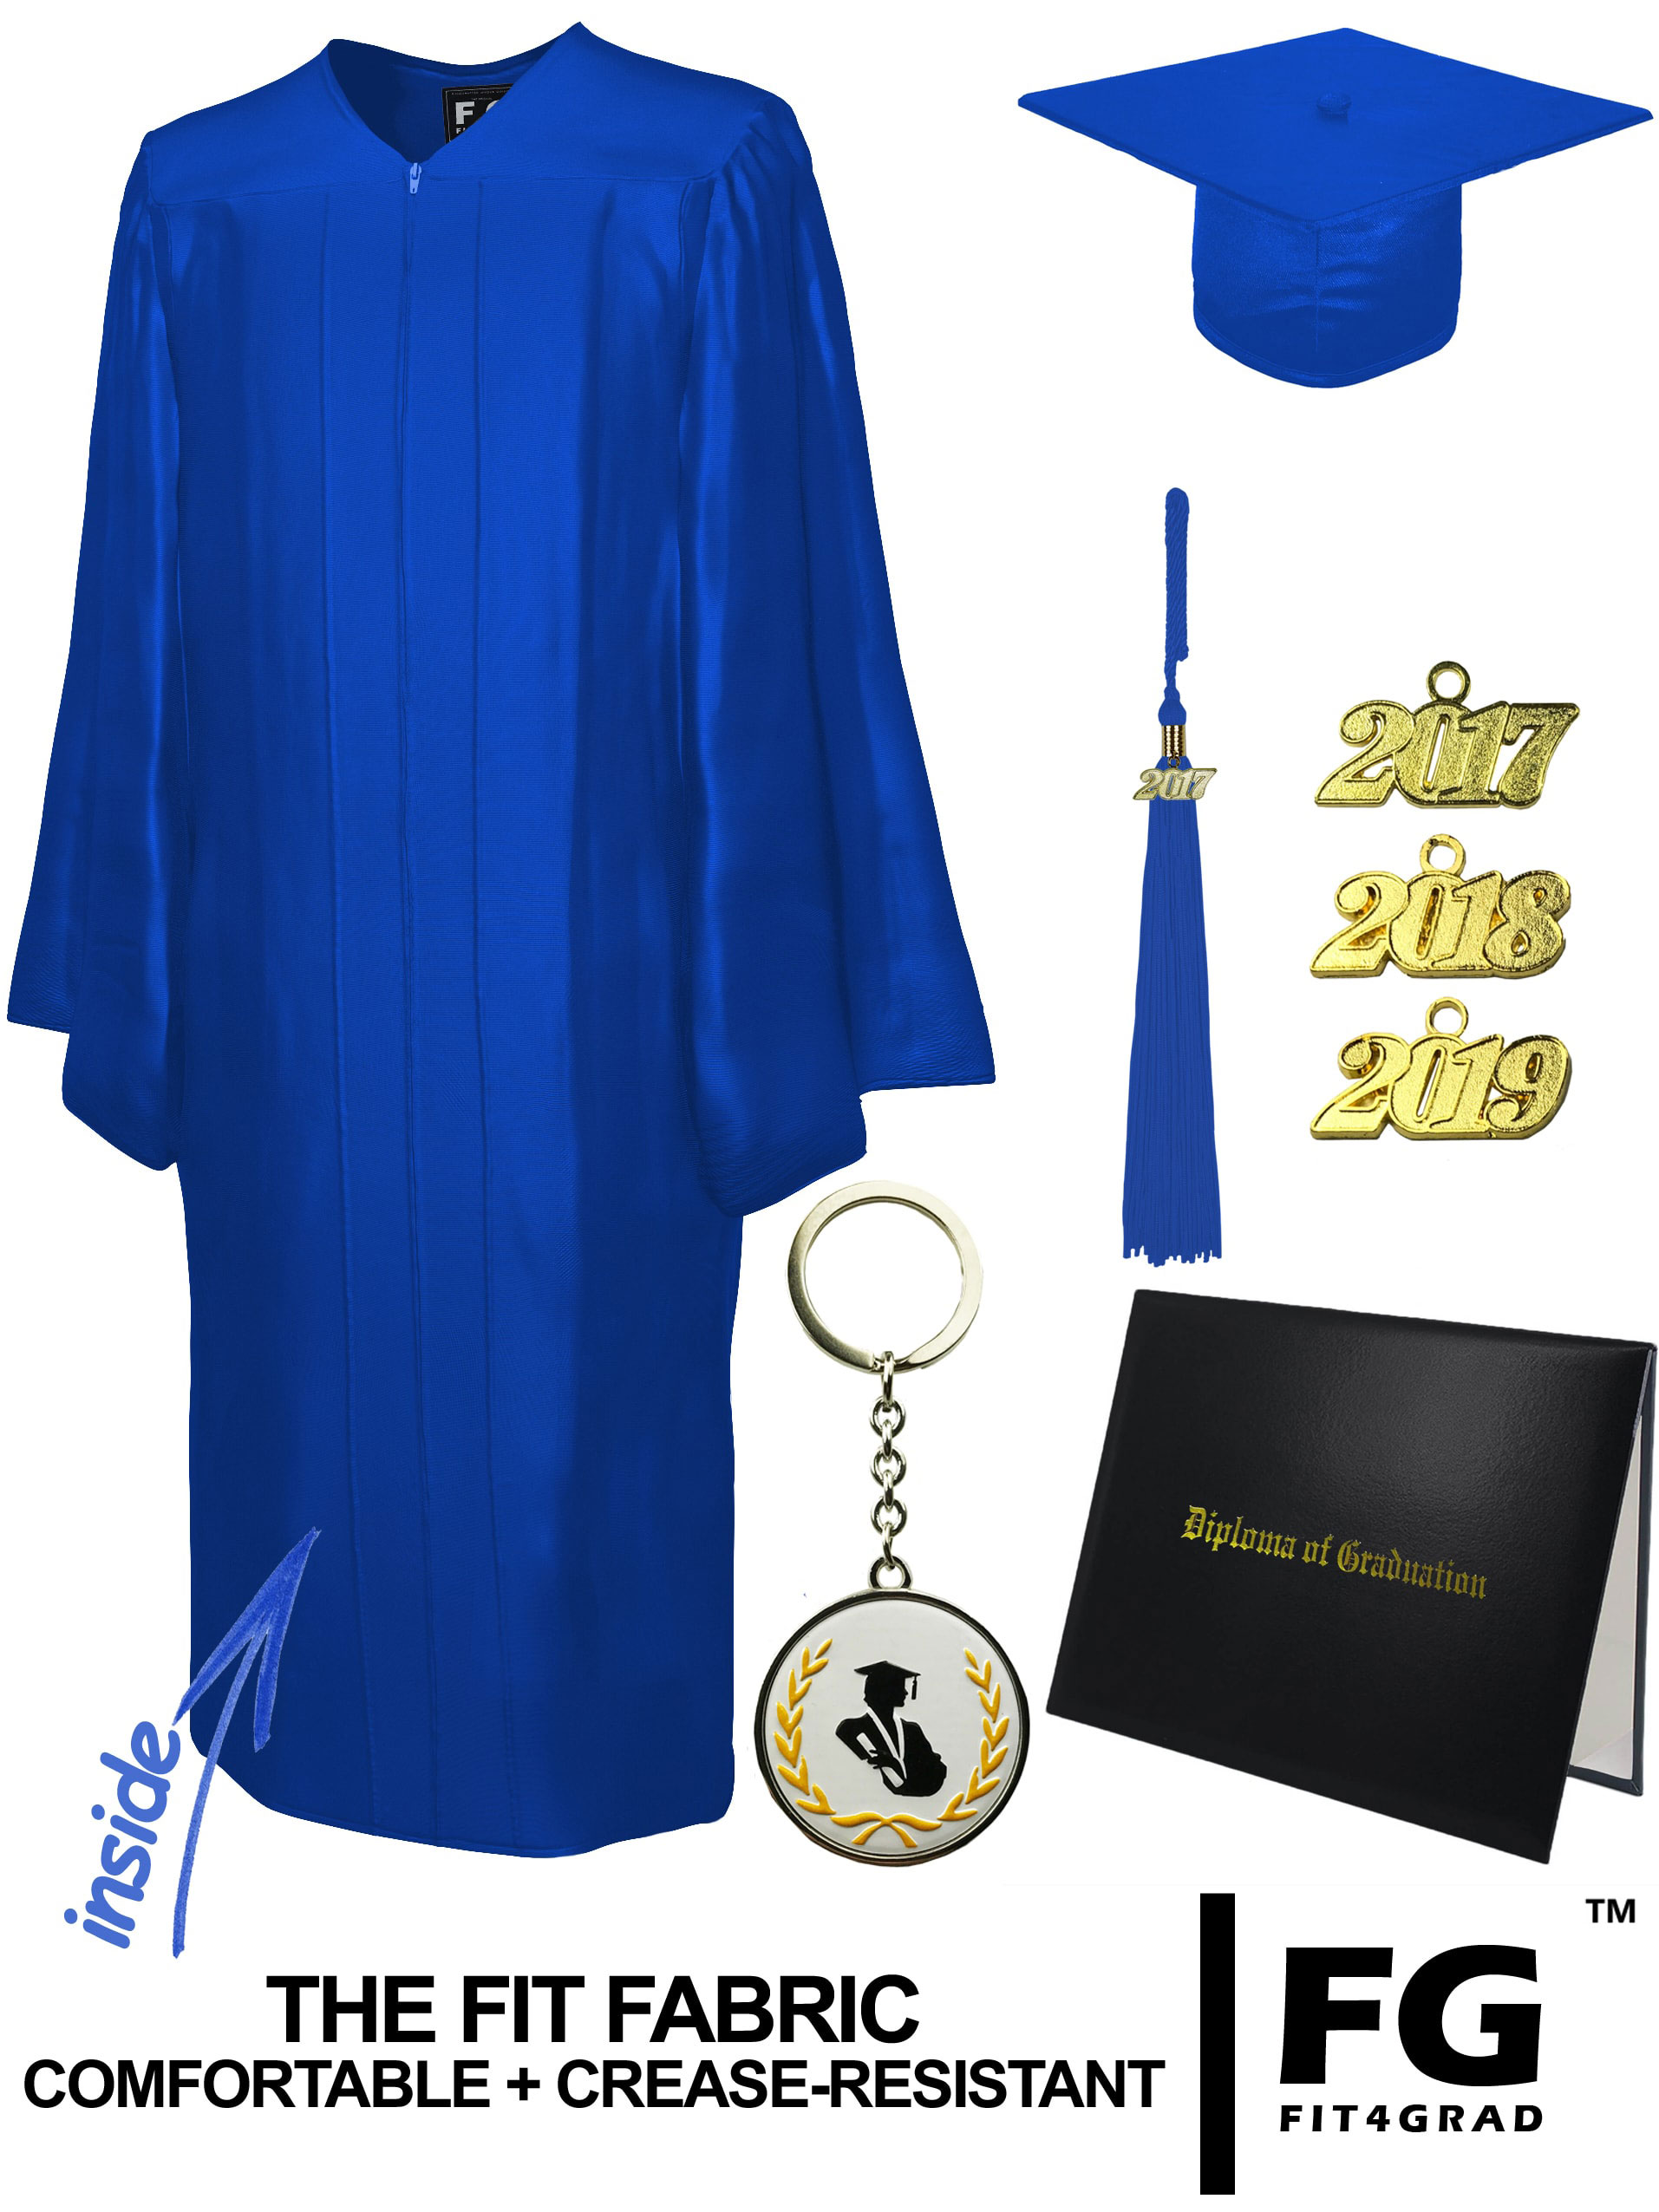 Kelly Green Graduation Cap, Gown and Tassel as low as $20.95 from  GraduationProduct1.com